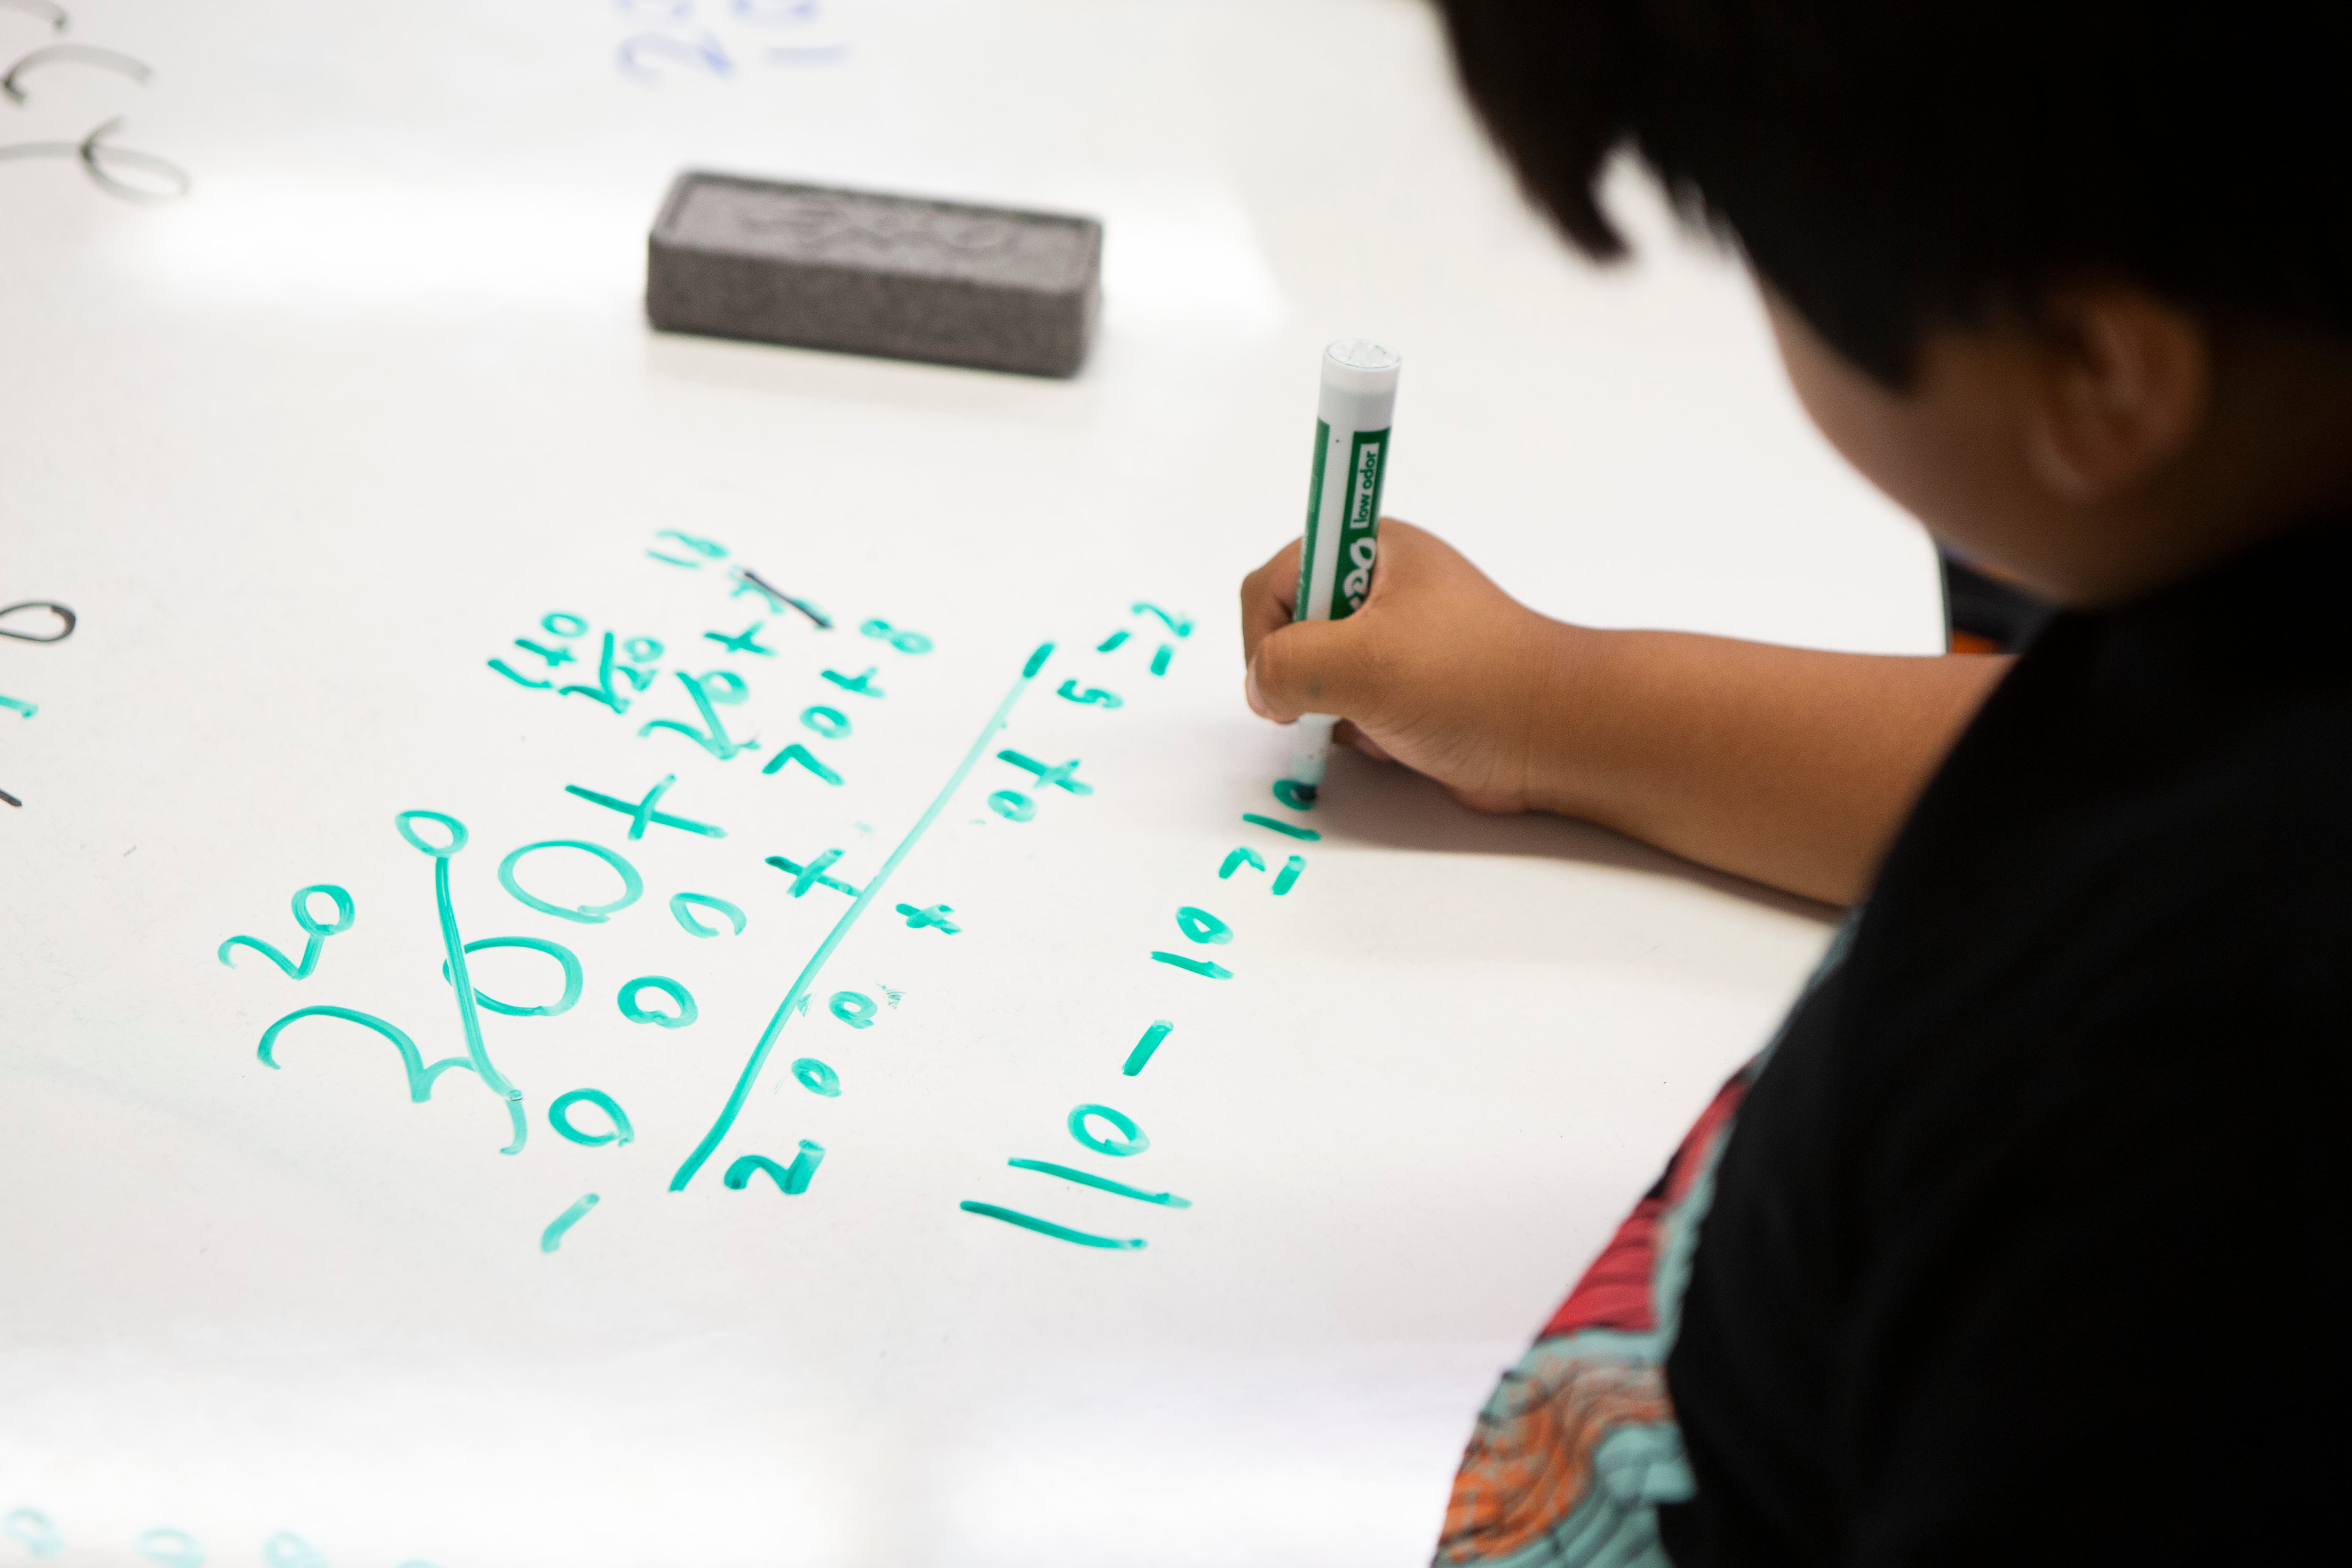 A young student writes numbers on a white board in green dry erase marker.